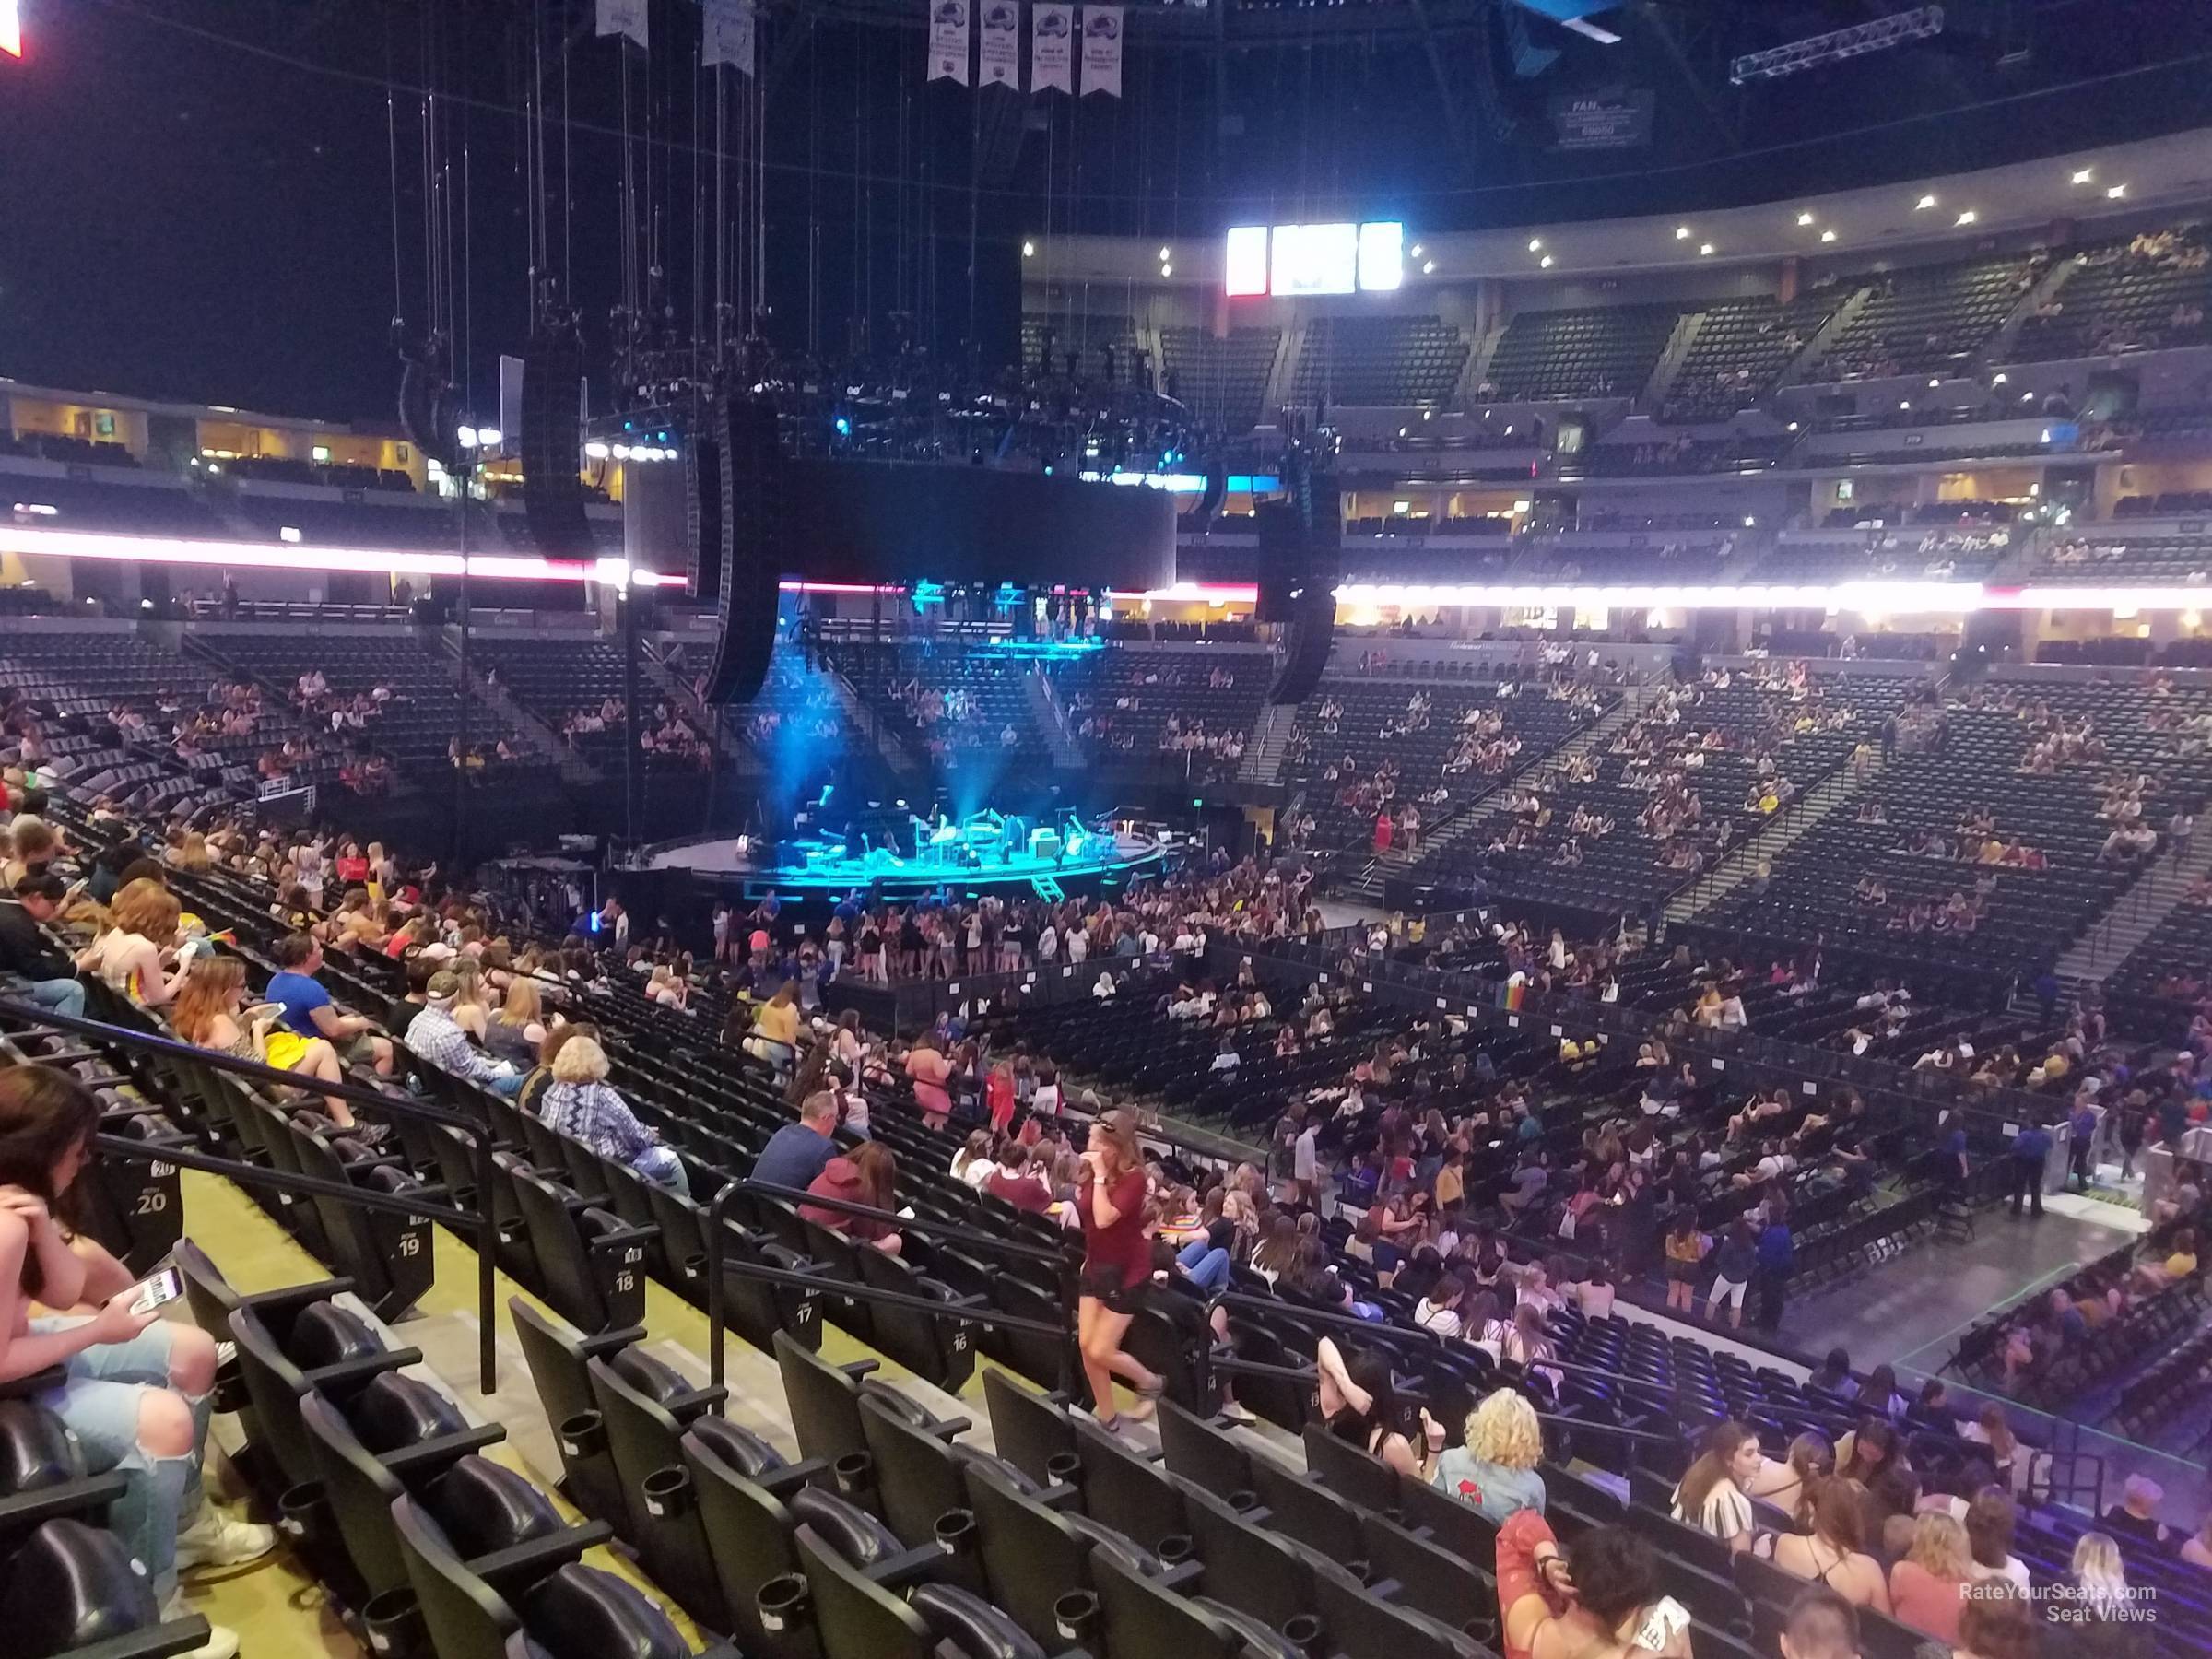 Pepsi Center Section 122 Concert Seating - RateYourSeats.com